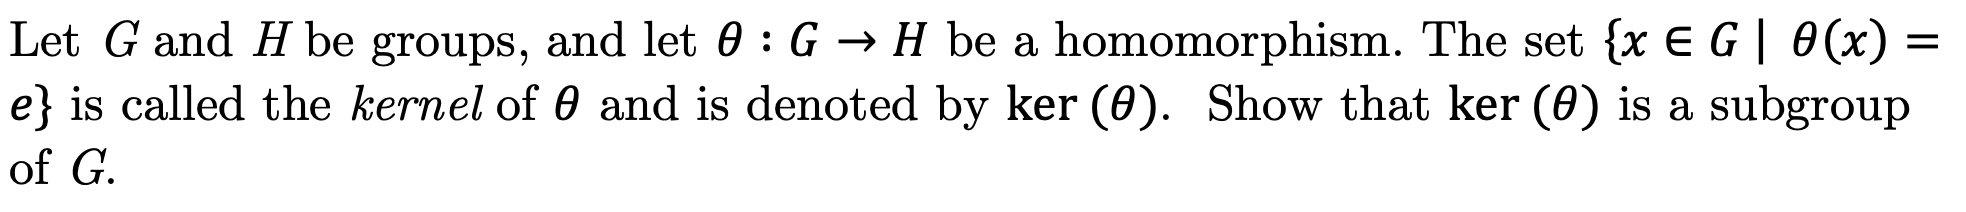 |Let G and H be groups, and let 0 : G > H be a homomorphism. The set {x E G| 0(x)
|e} is called the kernel of 0 and is denoted by ker (0). Show that ker (0) is a subgroup
|of G
-
